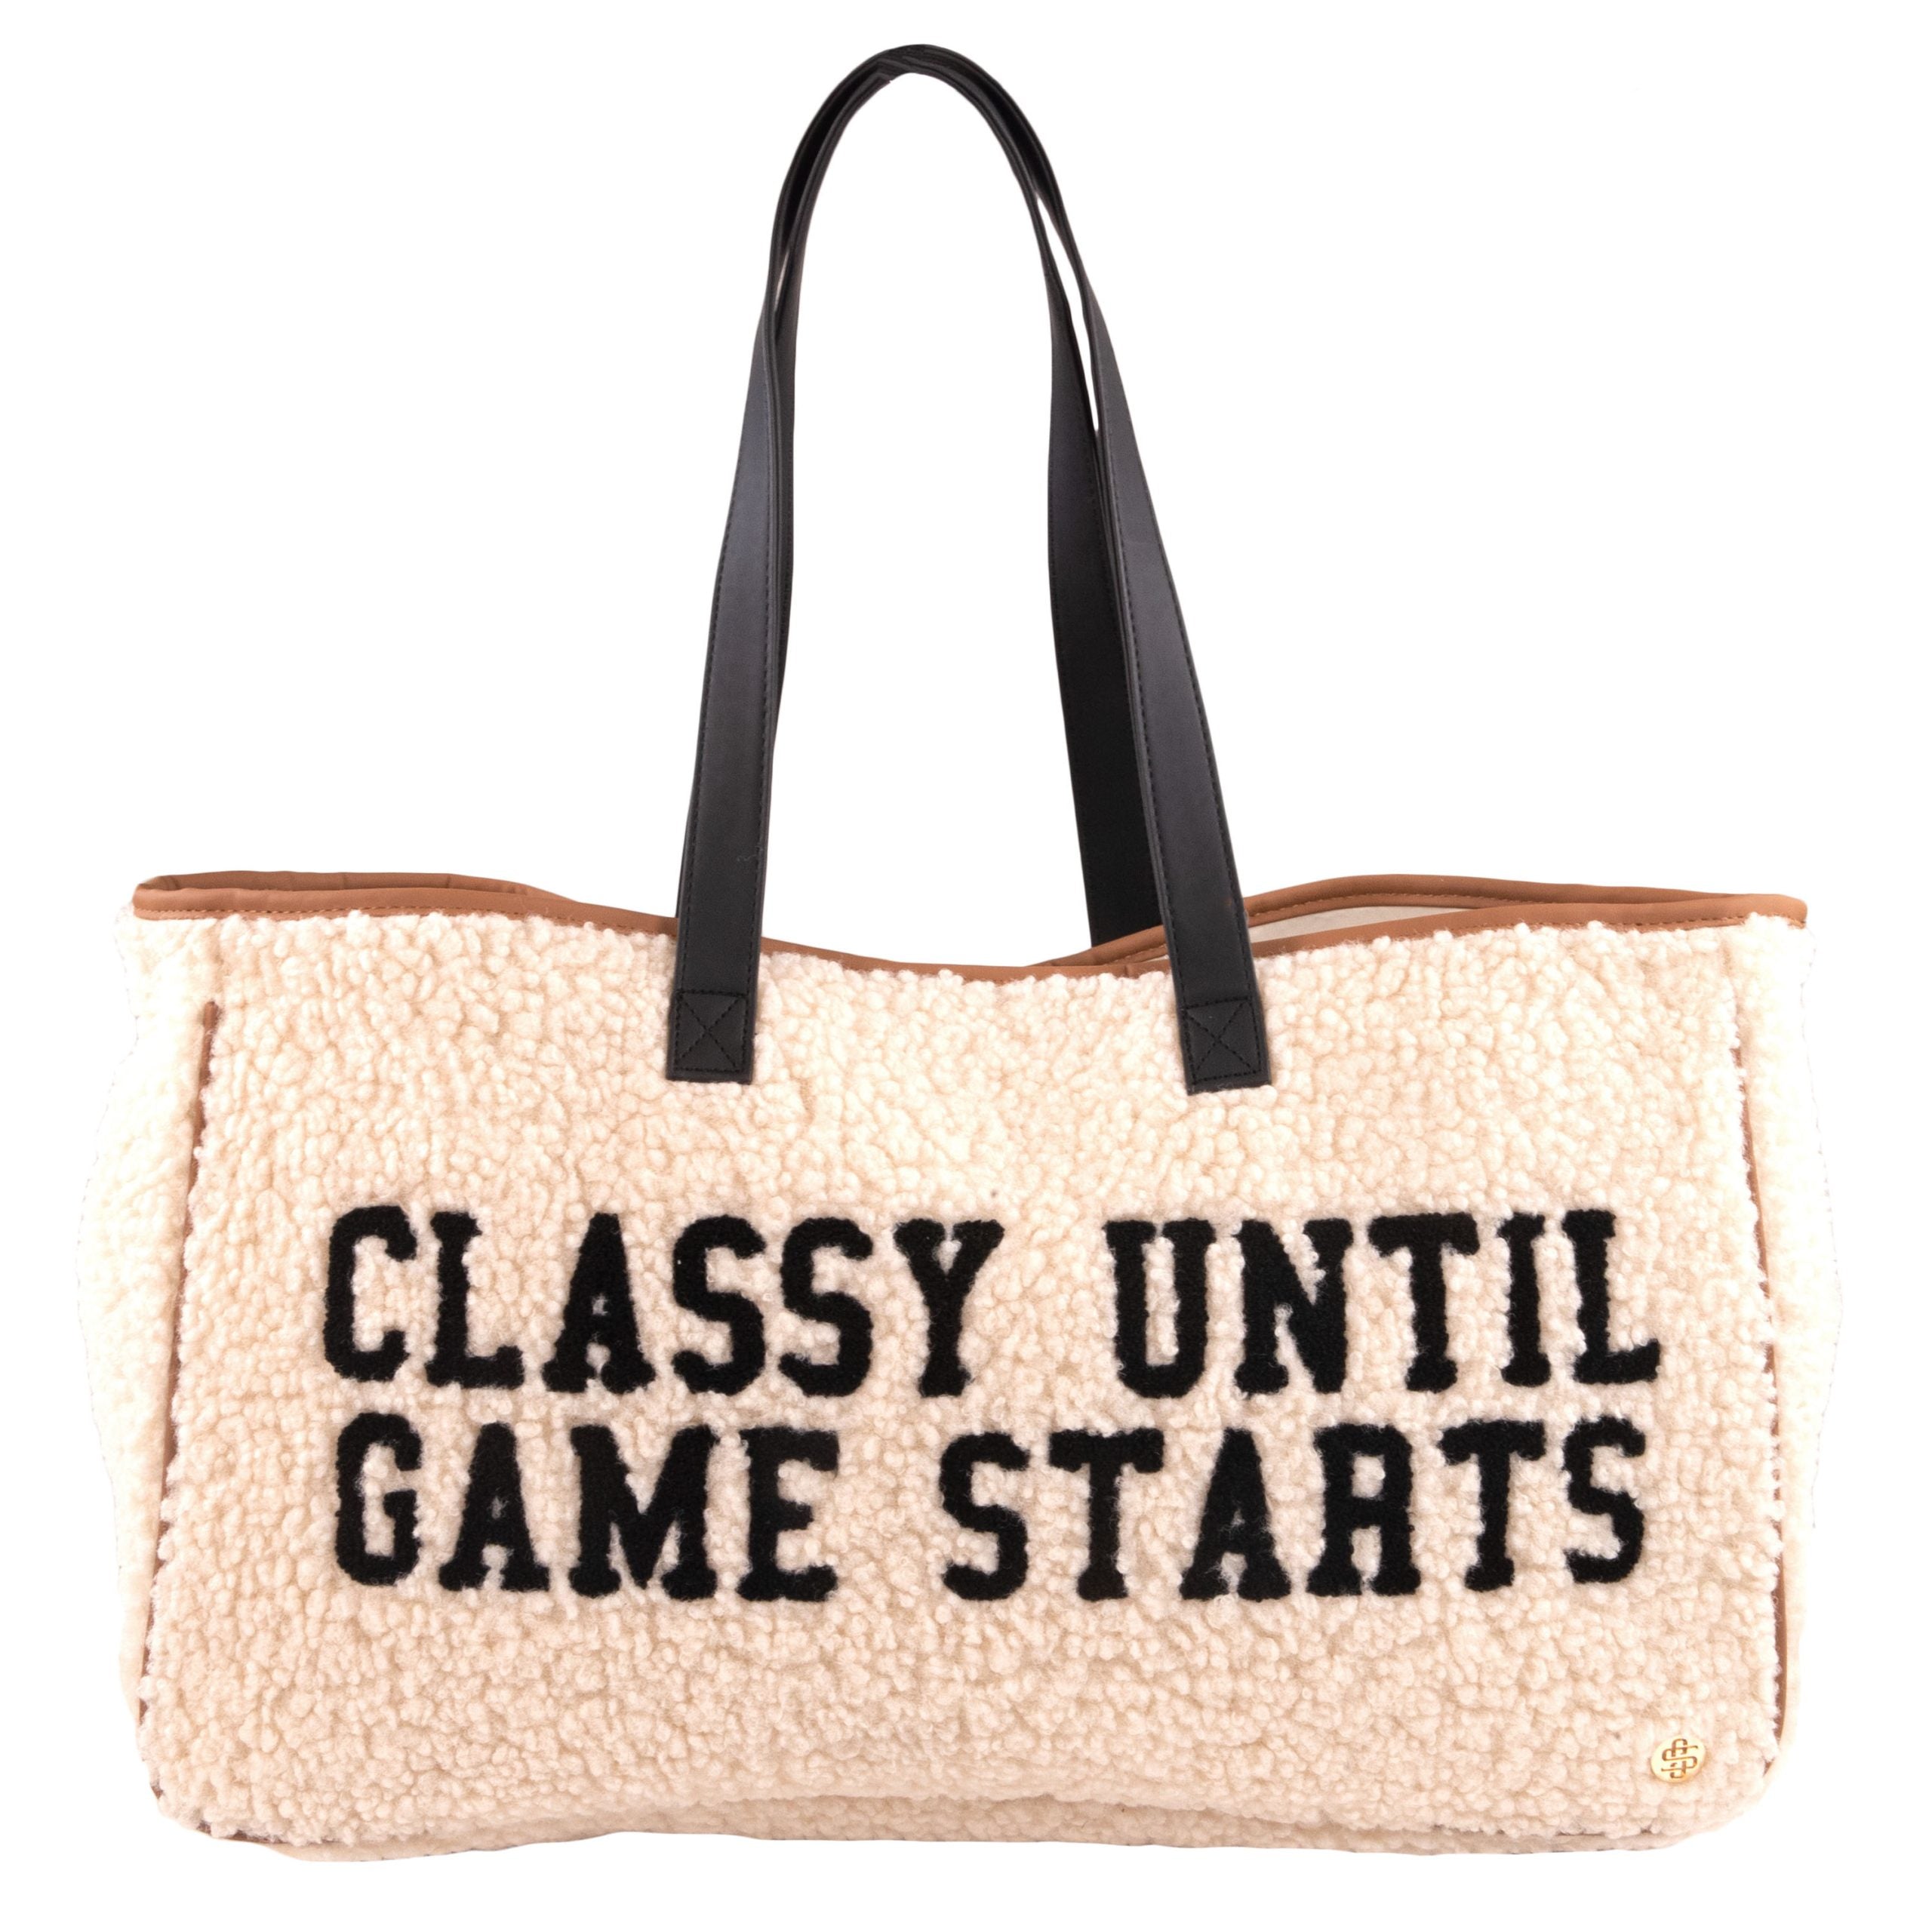 File to Style: TASTEFUL TOTE BAGS